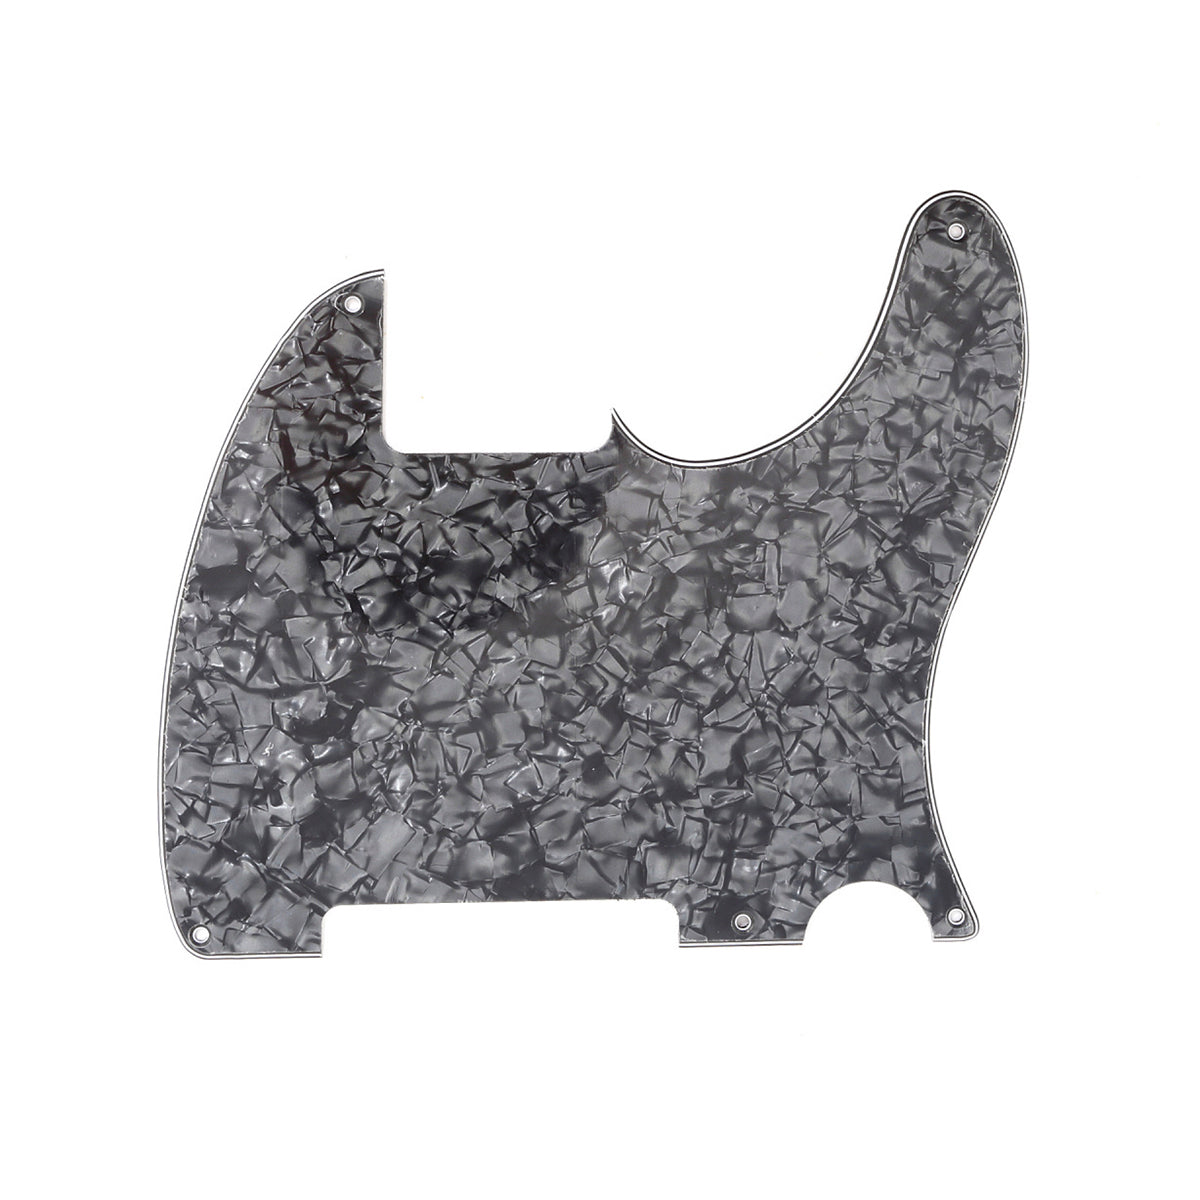 Musiclily 5 Hole Tele Pickguard Blank for Fender USA/Mexican Telecaster Esquire Guitar, 4Ply Black Pearl